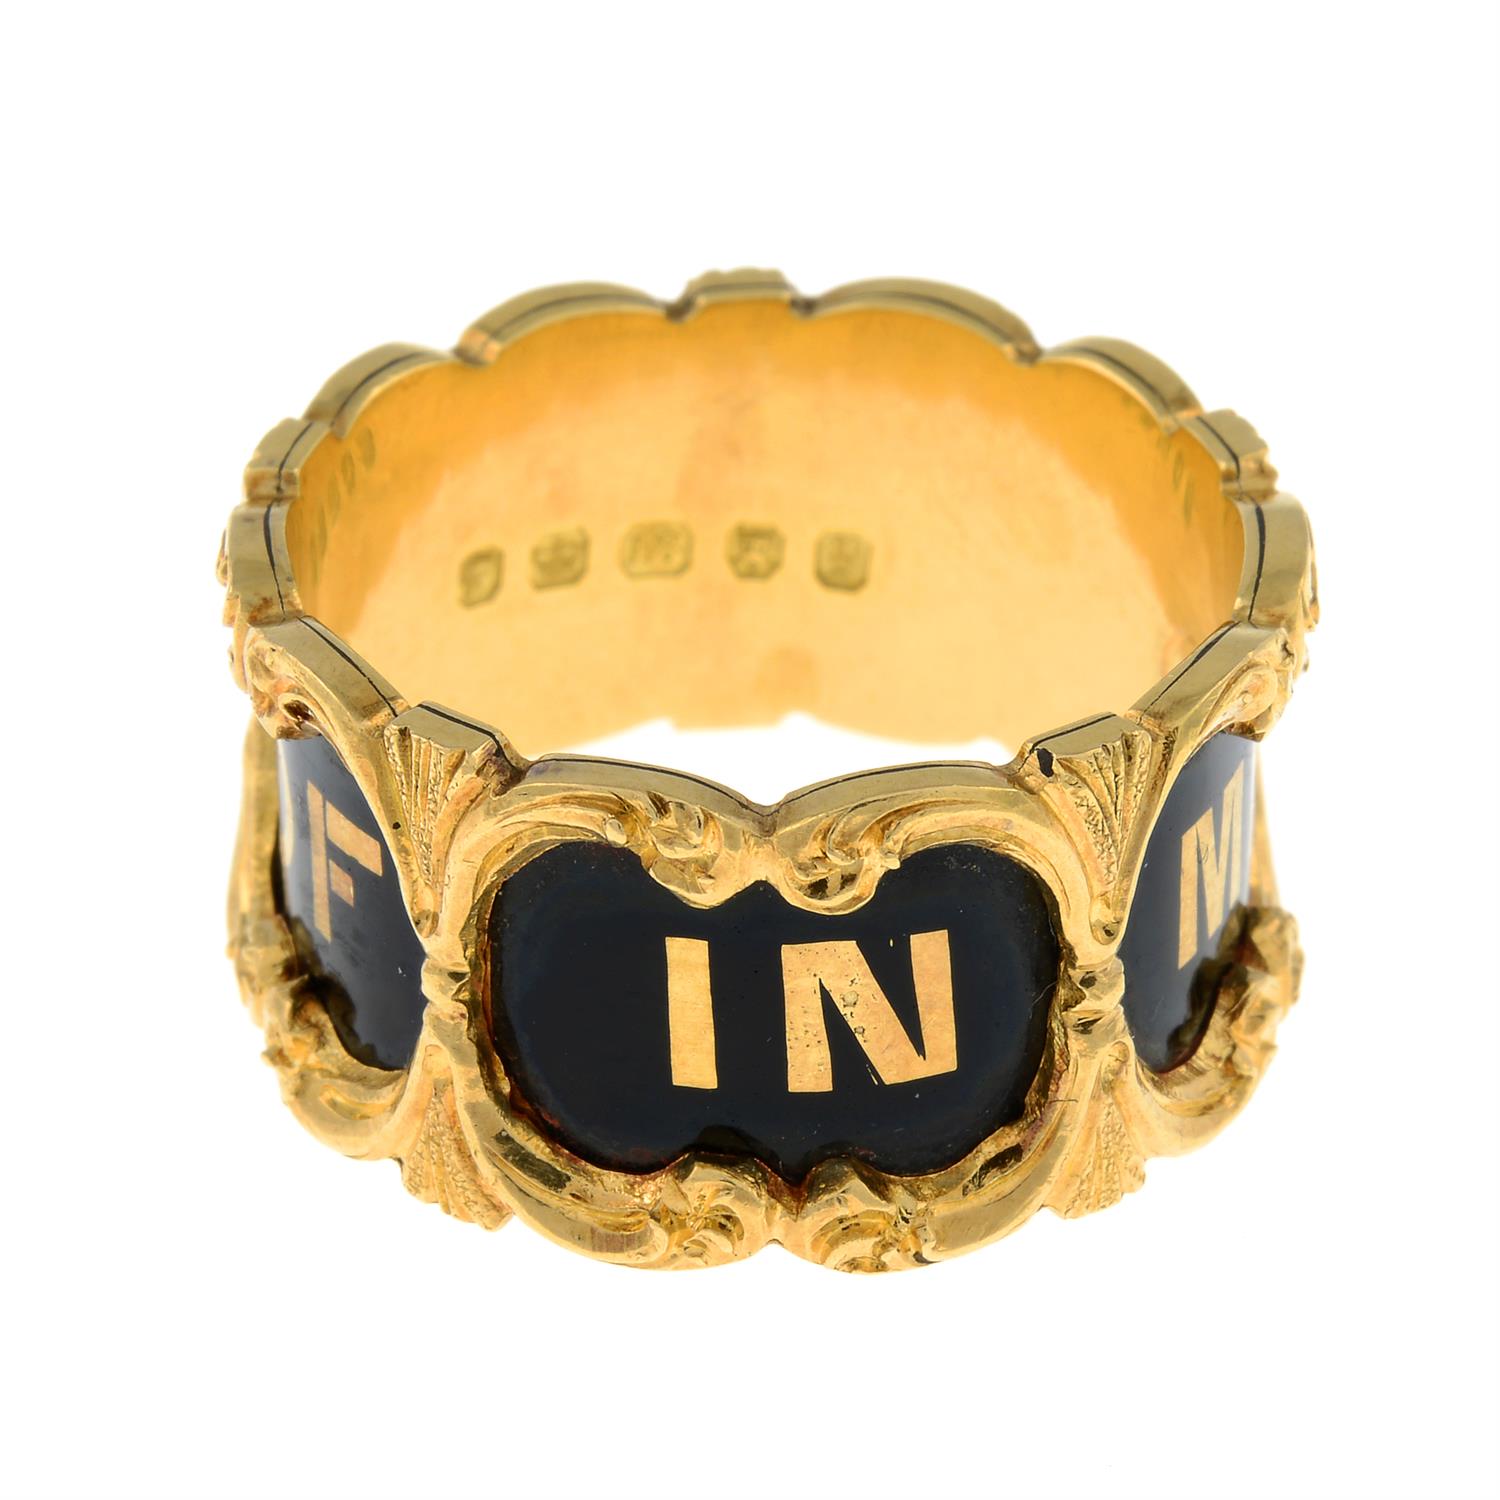 Victorian 18ct gold enamel mourning ring - Image 4 of 7